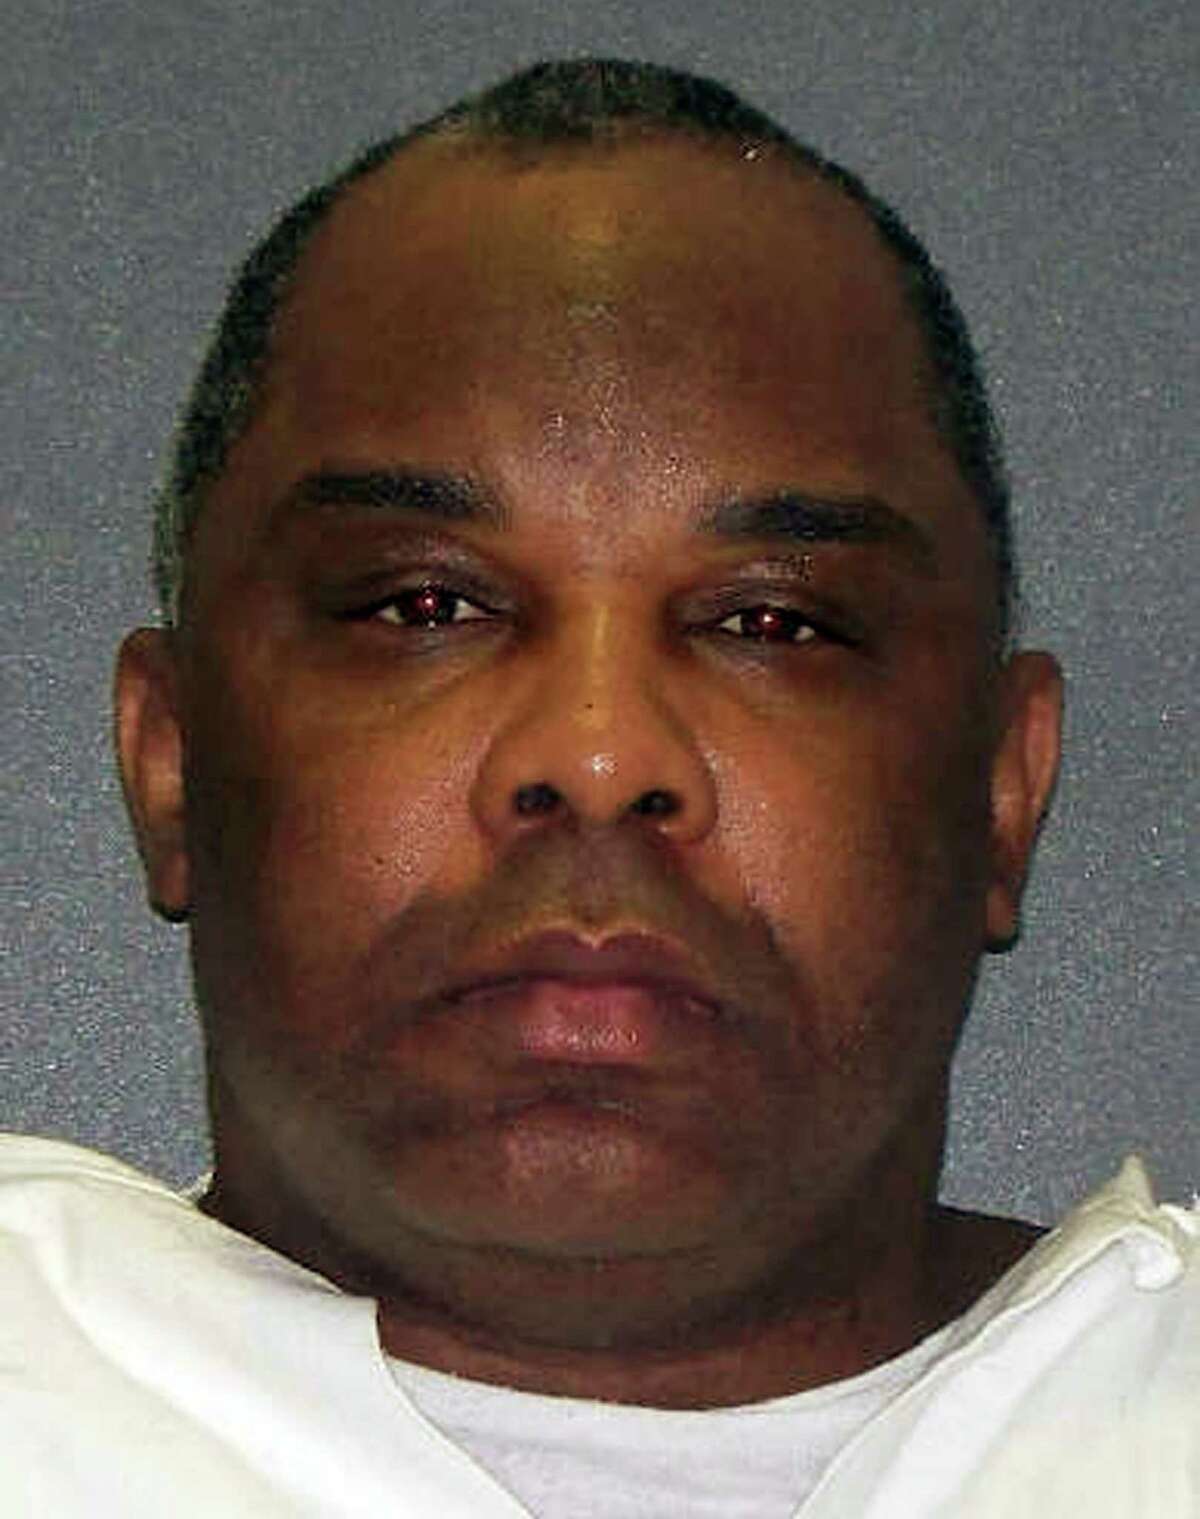 Jonathan Green convicted in the June 2000 slaying of a 12-year-old girl in Montgomery County, north of Houston. He survived an execution date in 2010 when Texas's highest criminal court granted a hearing on whether he was too mentally ill to be put to death.. (AP Photo/Texas Department of Criminal Justice)